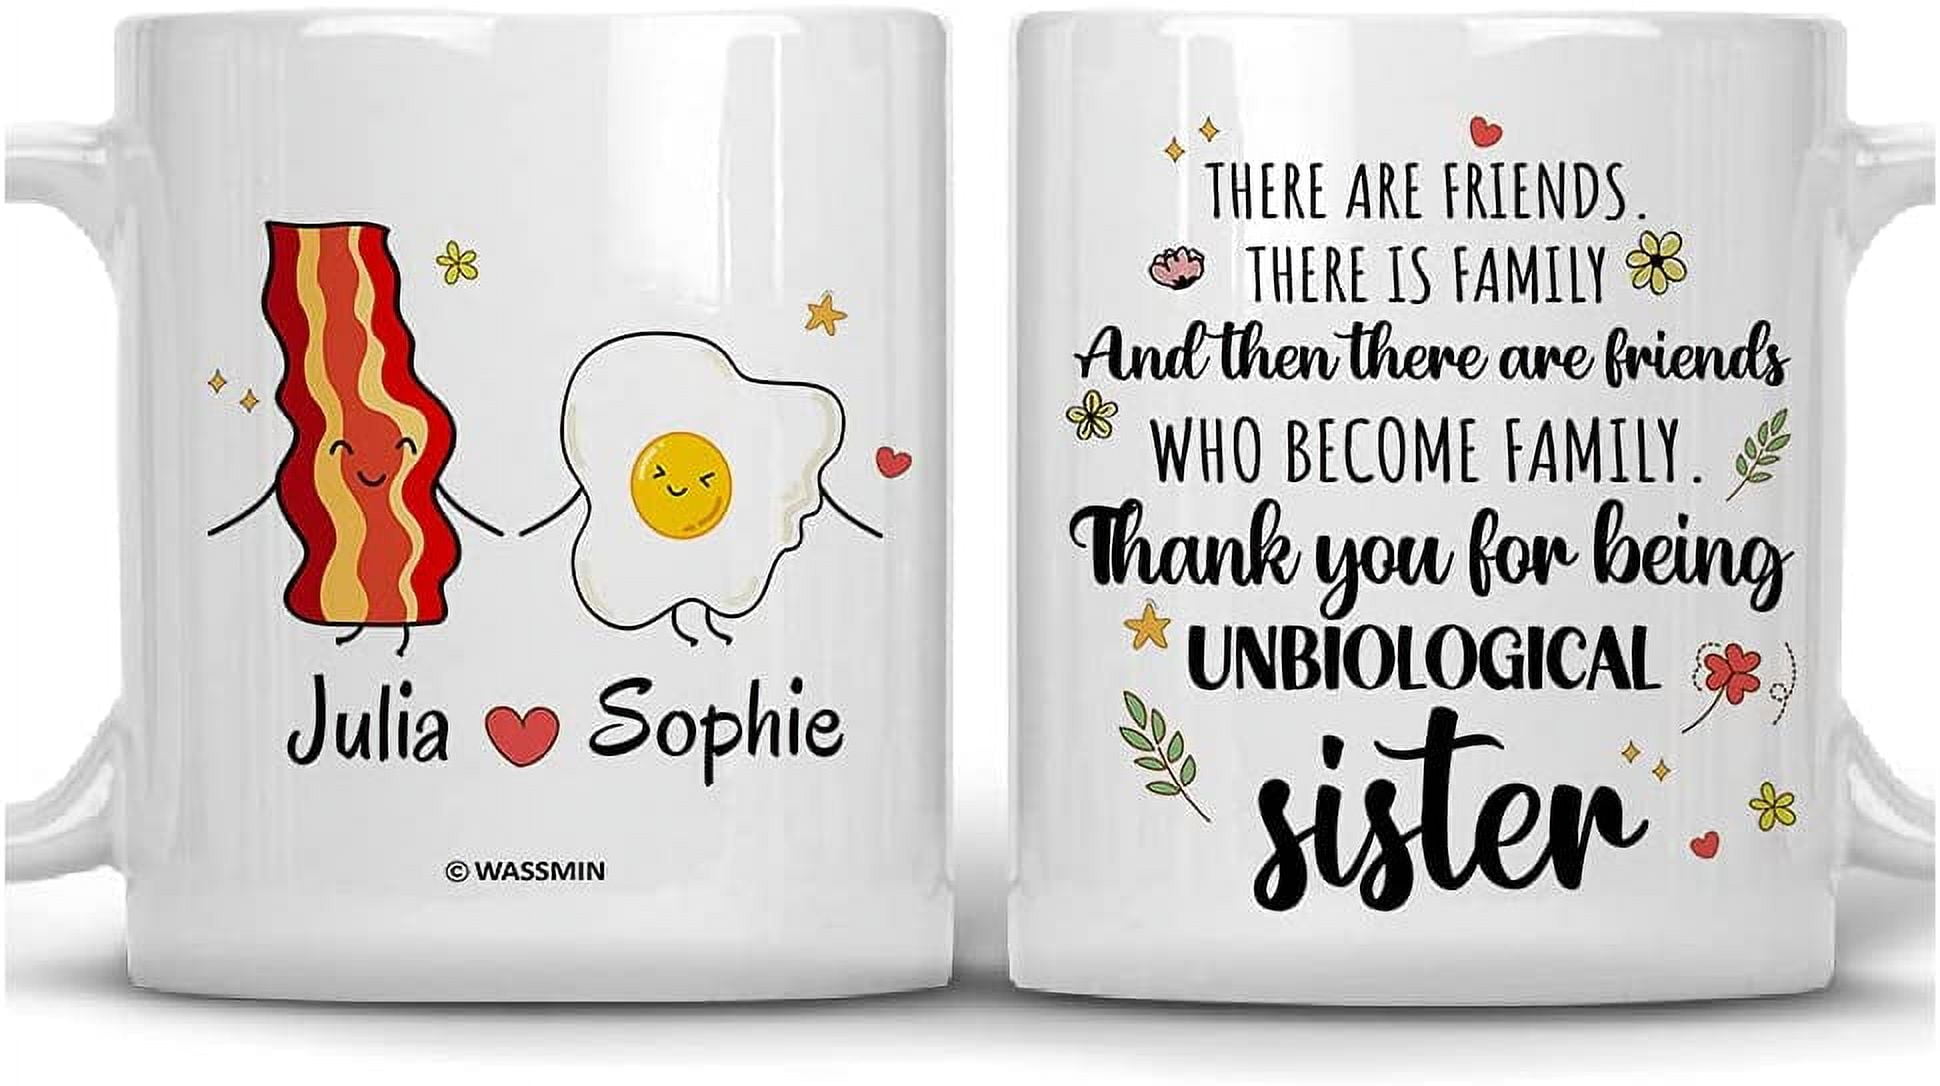 My D SQUARE Motivational Coffee Mug Meaning of Success Birthday or Return  Gifts for Colleague Brother Sister Boy Girls Frineds 1 Piece White Ceramic